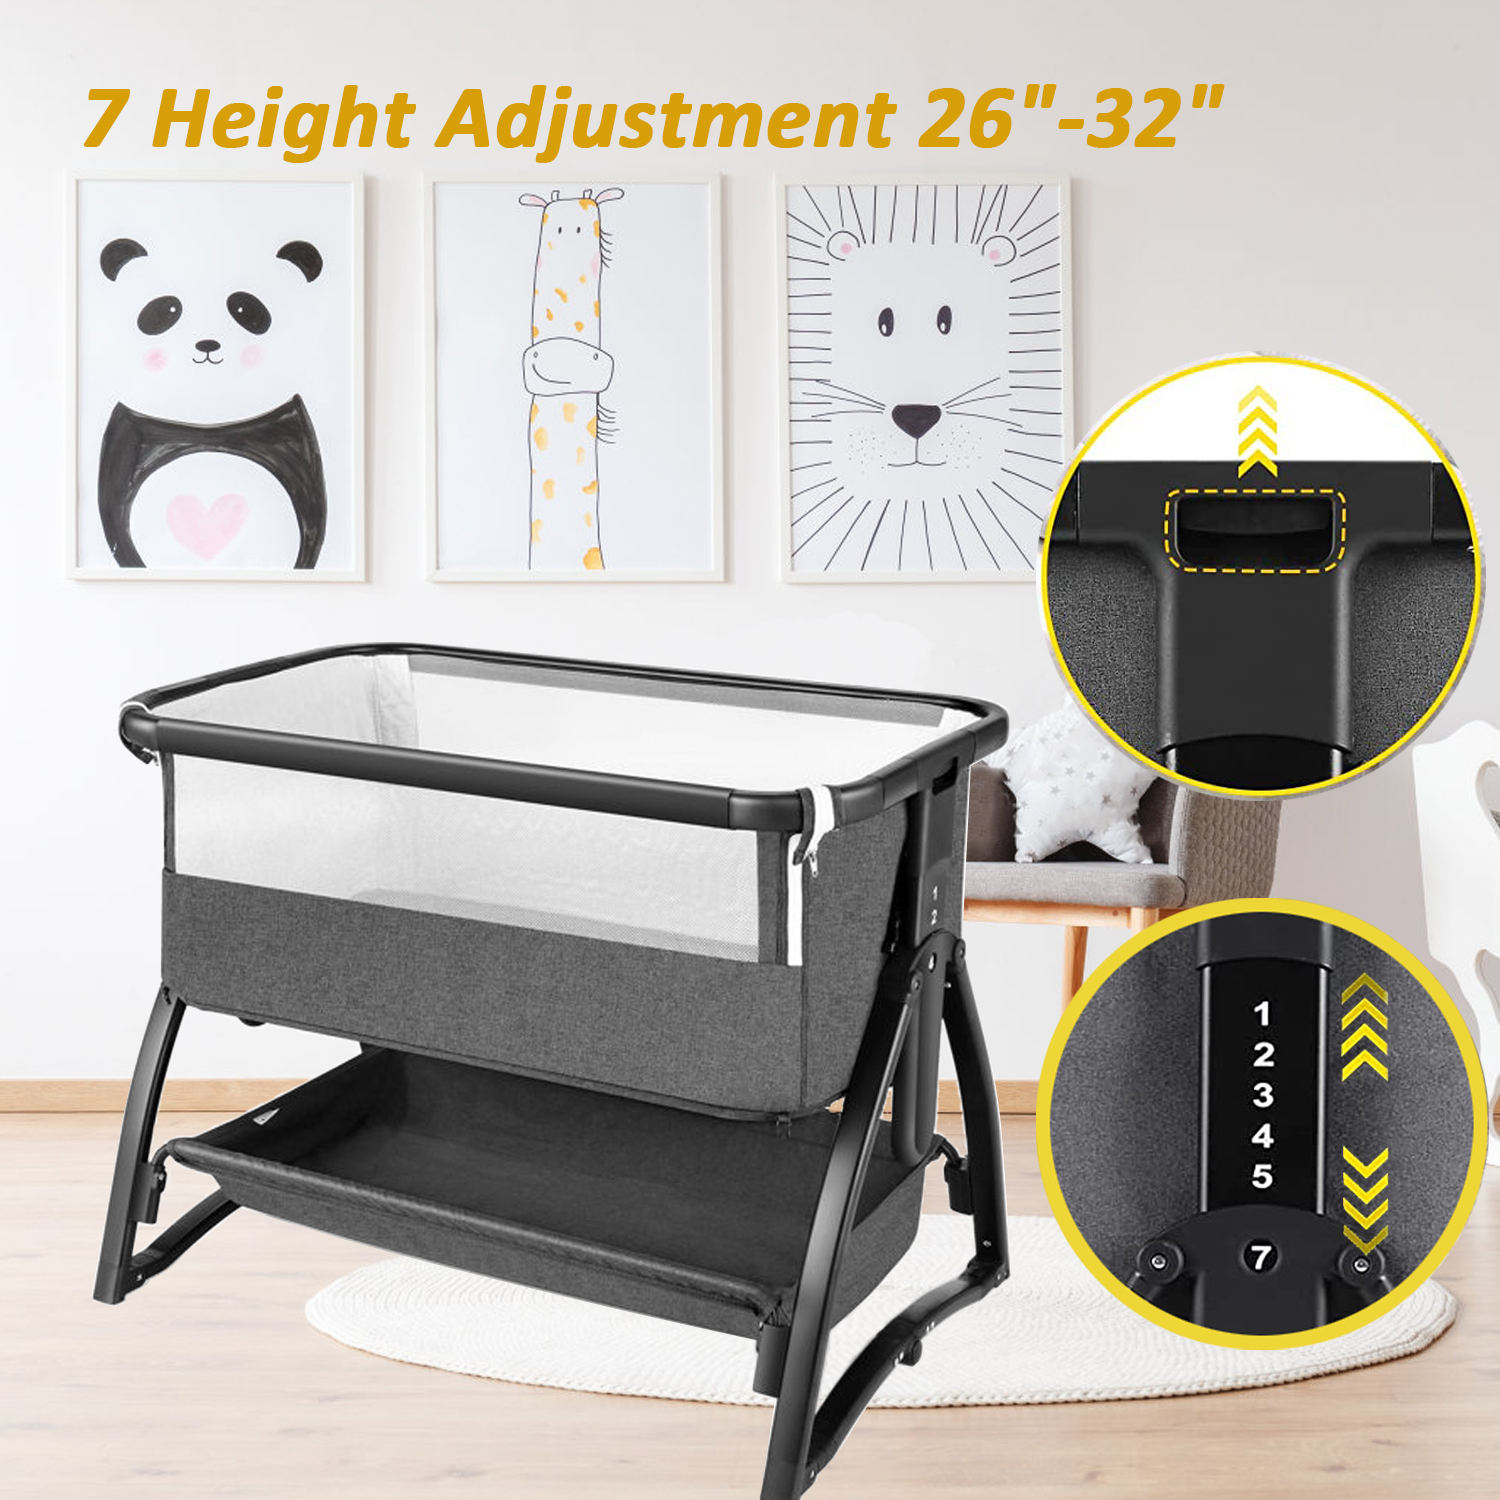 Adnoom Baby Bassinet Bedside Sleeper, Baby Bed to Babies Cradle, Adjustable 7-Level Height Portable Bed for Newborn/ Infant/ Baby Boy/ Baby Girl (Light Gray) - image 3 of 12